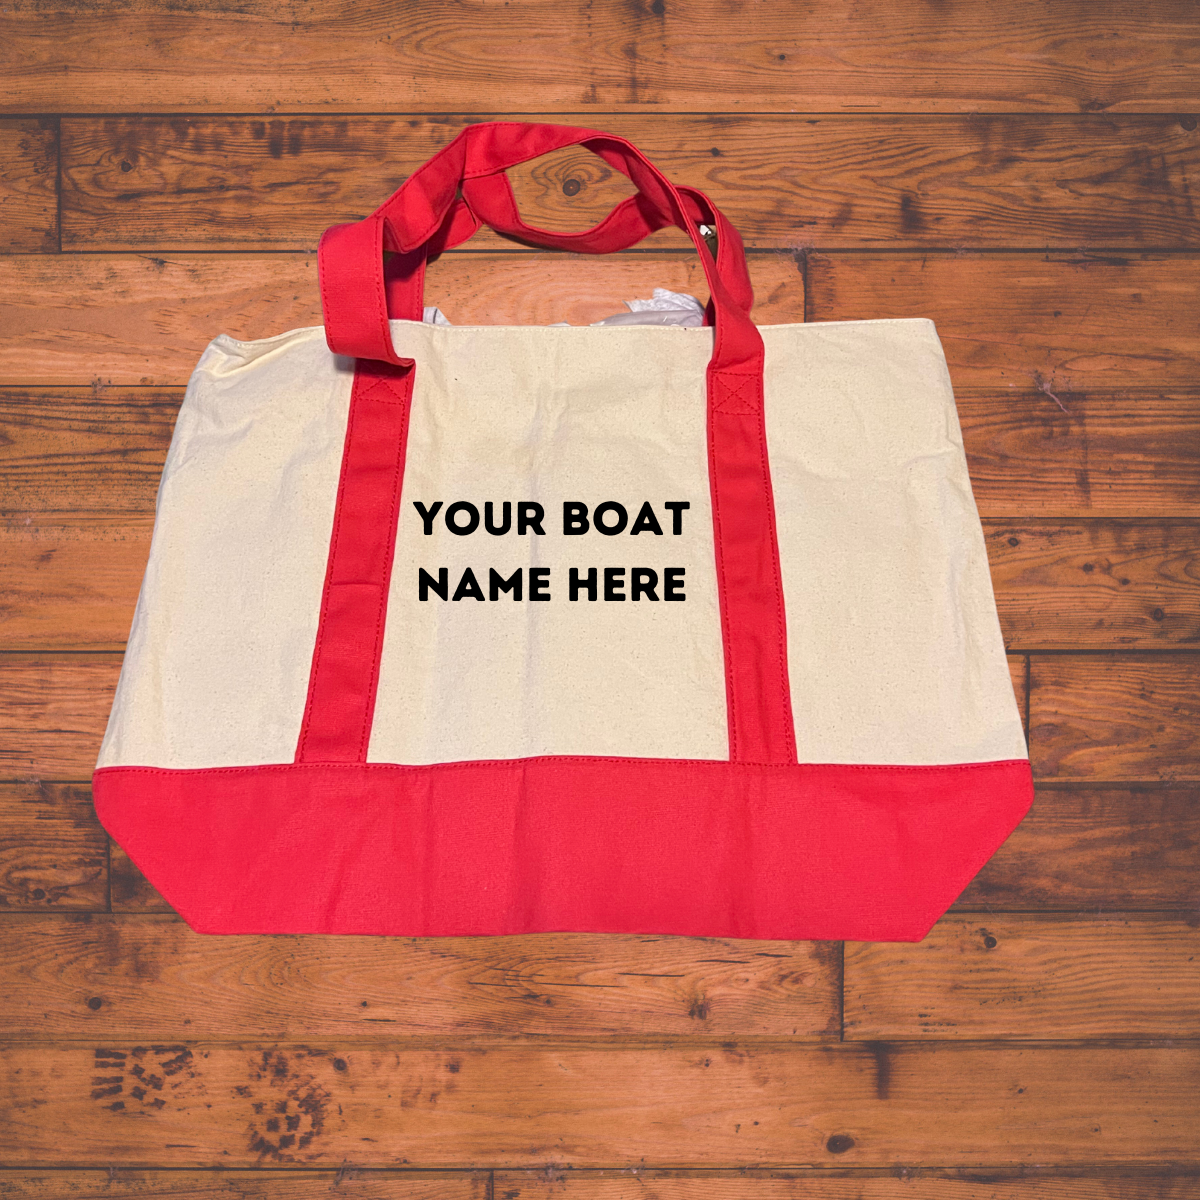 Personalized canvas boat shopping bag